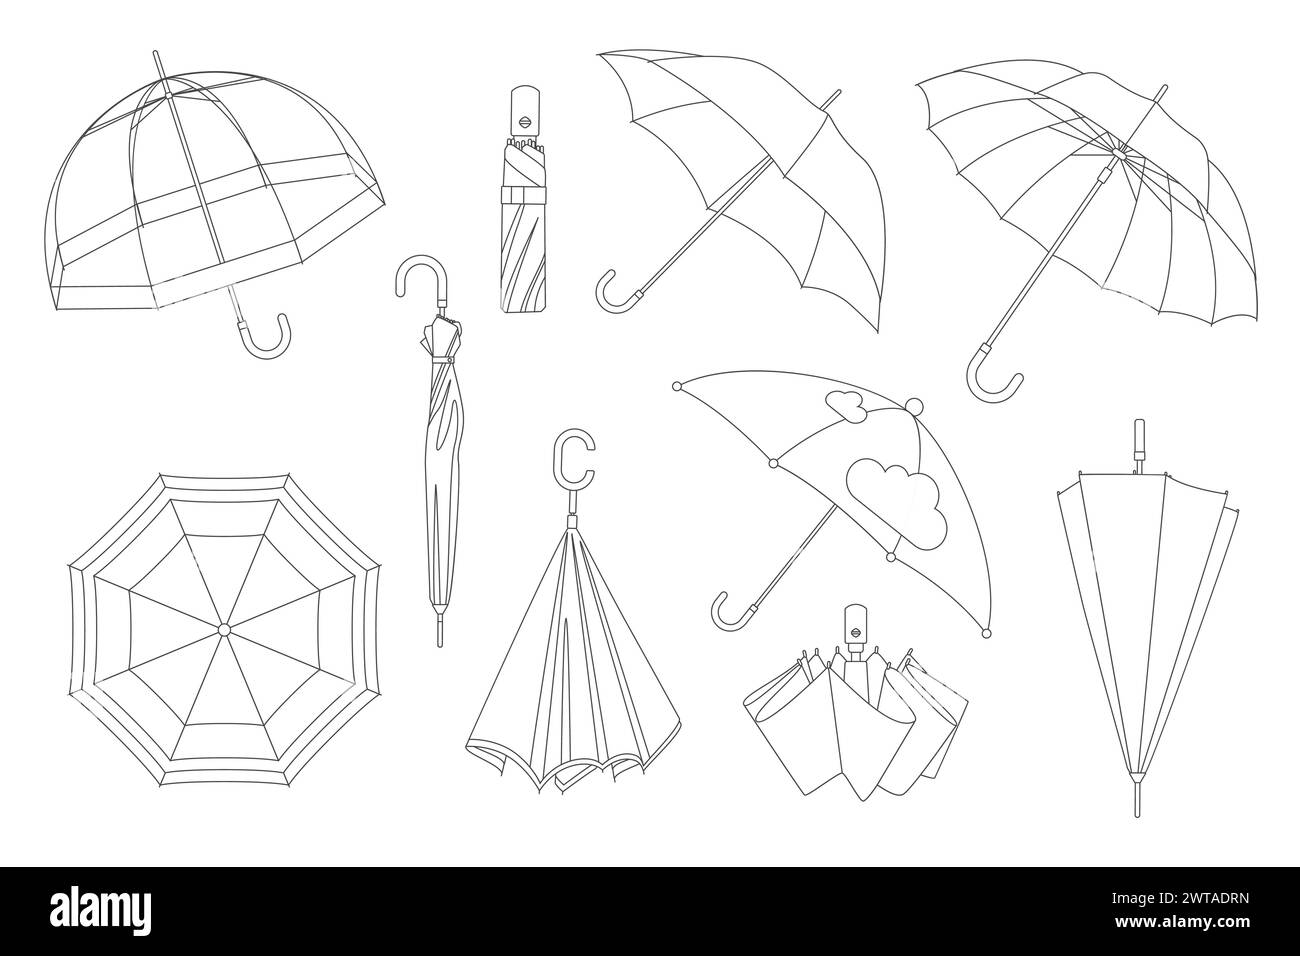 Open and closed umbrellas for rain protection, thin line icon set. Sketch fashion accessory collection of rainy season, folded parasol or flying waterproof umbrella with handle vector illustration Stock Vector